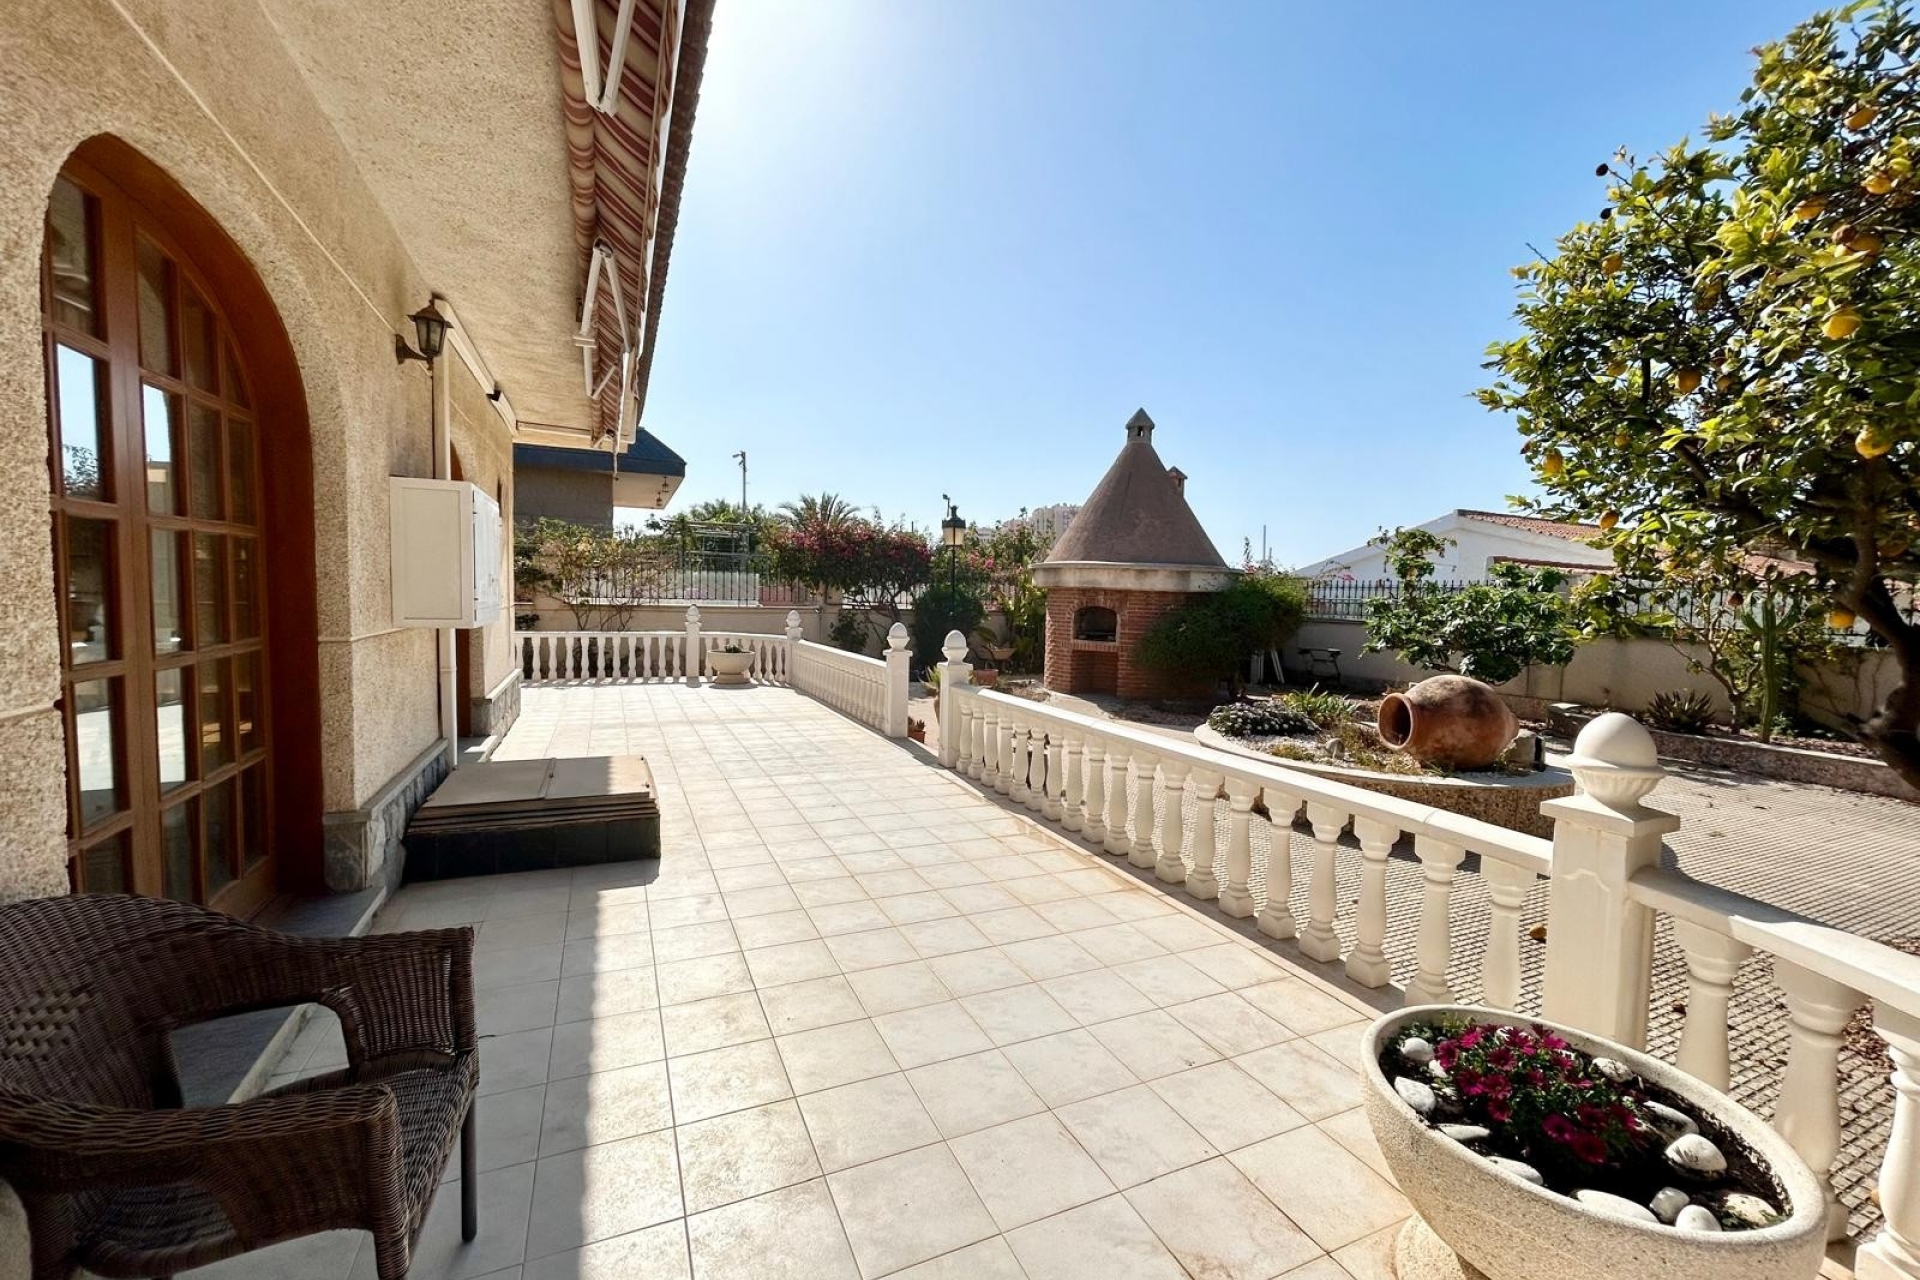 Property on Hold - Villa for sale - Torrevieja - Torrevieja Town Centre